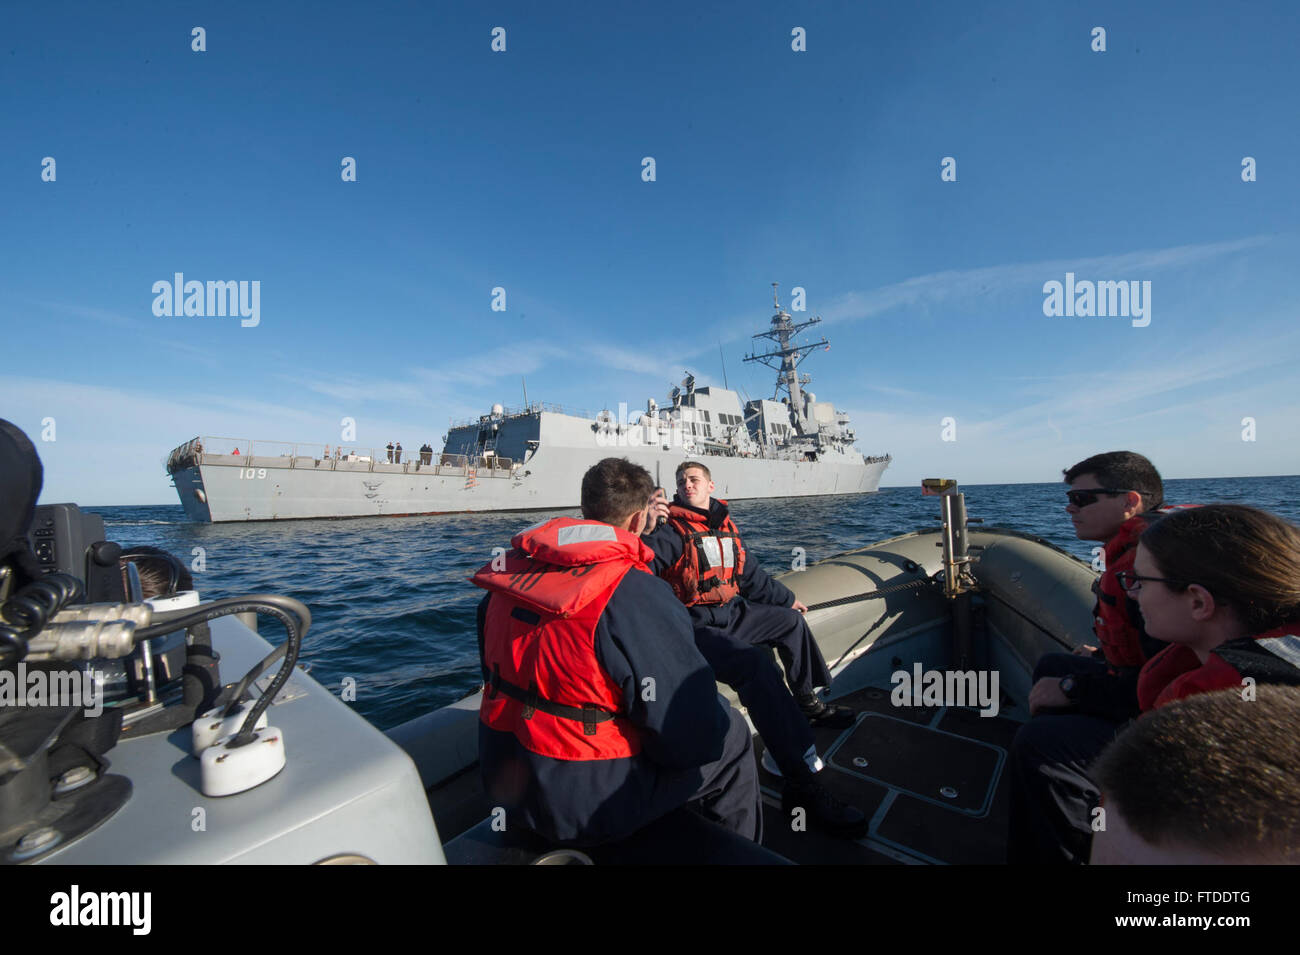 150617-N-ZE250-001 BALTIC SEA (June 17, 2015) Sailors ride in a rigid hull inflatable boat (RHIB) from the USS Jason Dunham (DDG 109) in route to Danish Navy Frigate HDMS Absalon (L16) for a tour of the allied vessel June 17, 2015. Jason Dunham, an Arleigh Burke-class guided-missile destroyer homeported in Norfolk, is participating in exercise Baltic Operations (BALTOPS) 2015. BALTOPS is an annually recurring multinational exercise designed to enhance flexibility and interoperability, as well as demonstrate resolve of Allied and partner forces to defend the Baltic region. (U.S. Navy photo by M Stock Photo